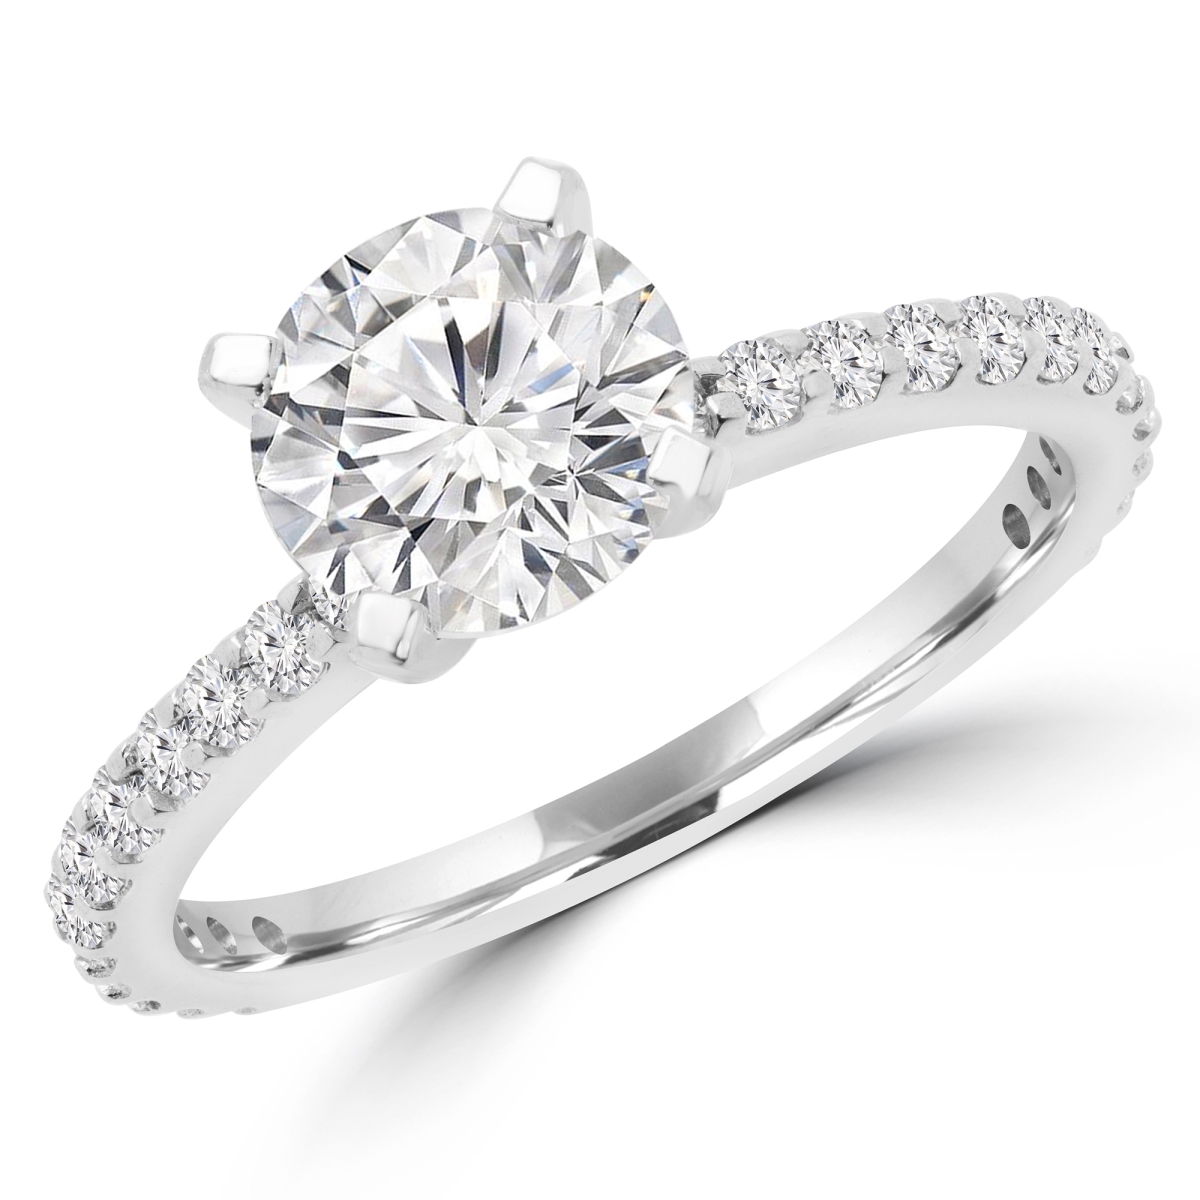 Picture of Majesty Diamonds MD170246-8 0.9 CTW Round Diamond Solitaire with Accents Engagement Ring in 14K White Gold - Size 8